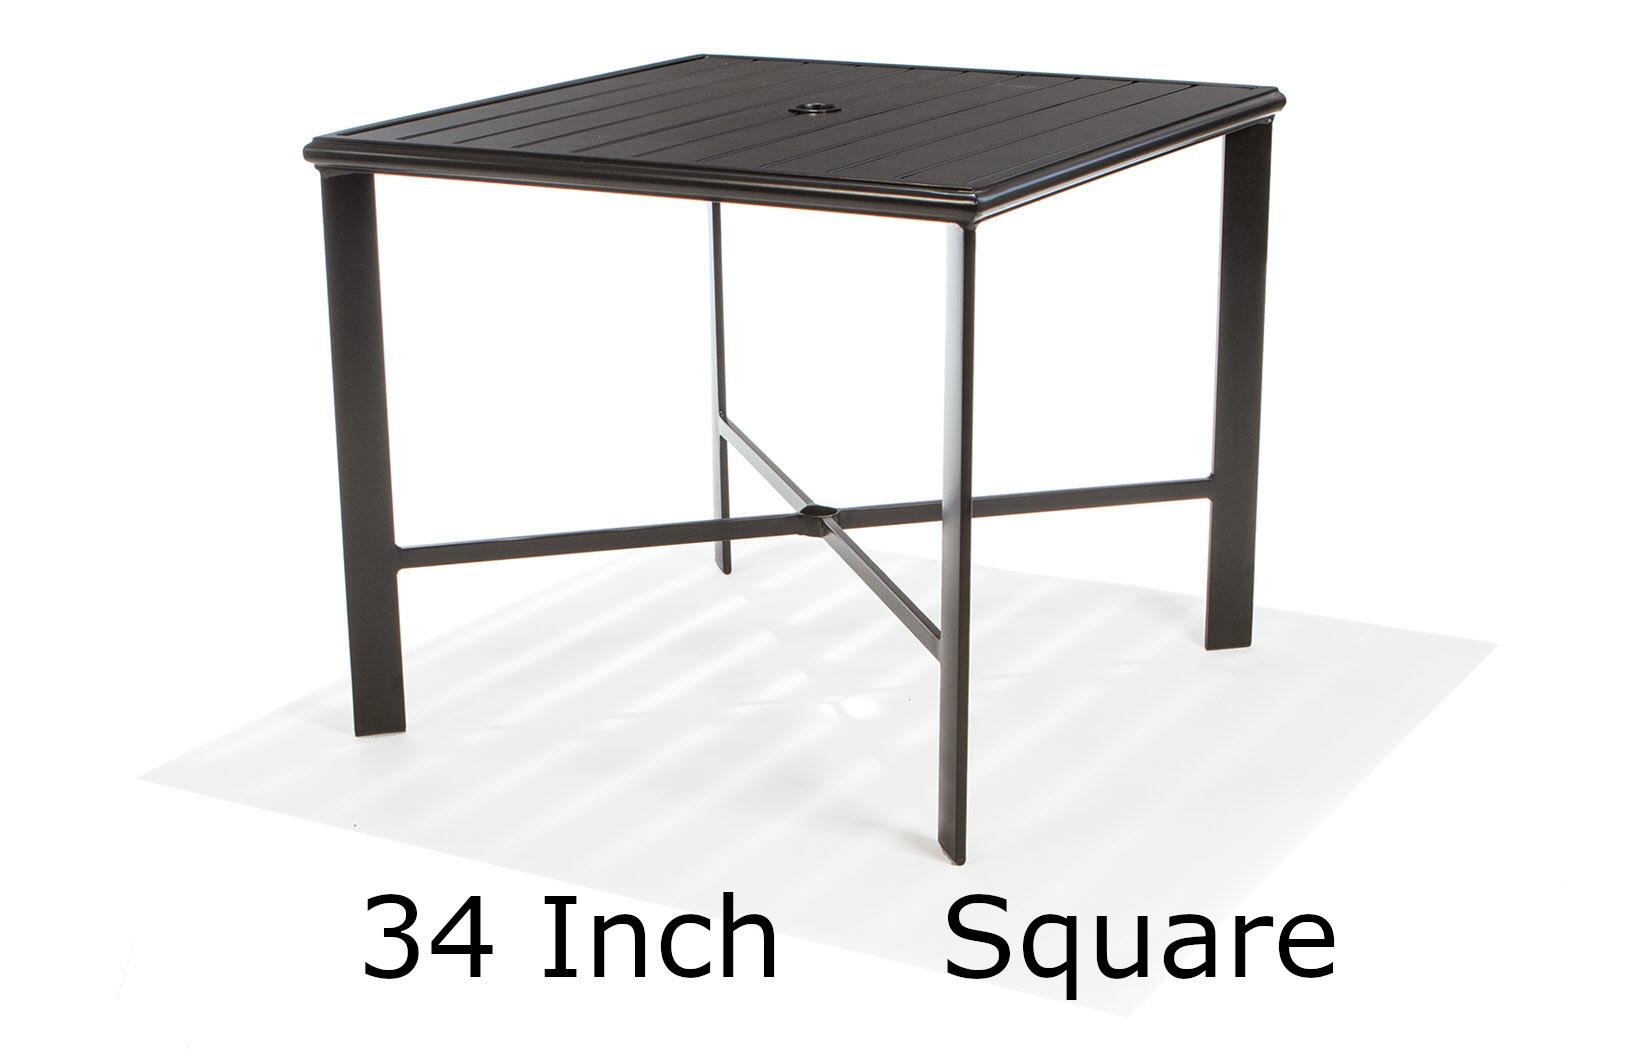 34 Inch Square Stamped Aluminum Top Fully Welded Dining Table